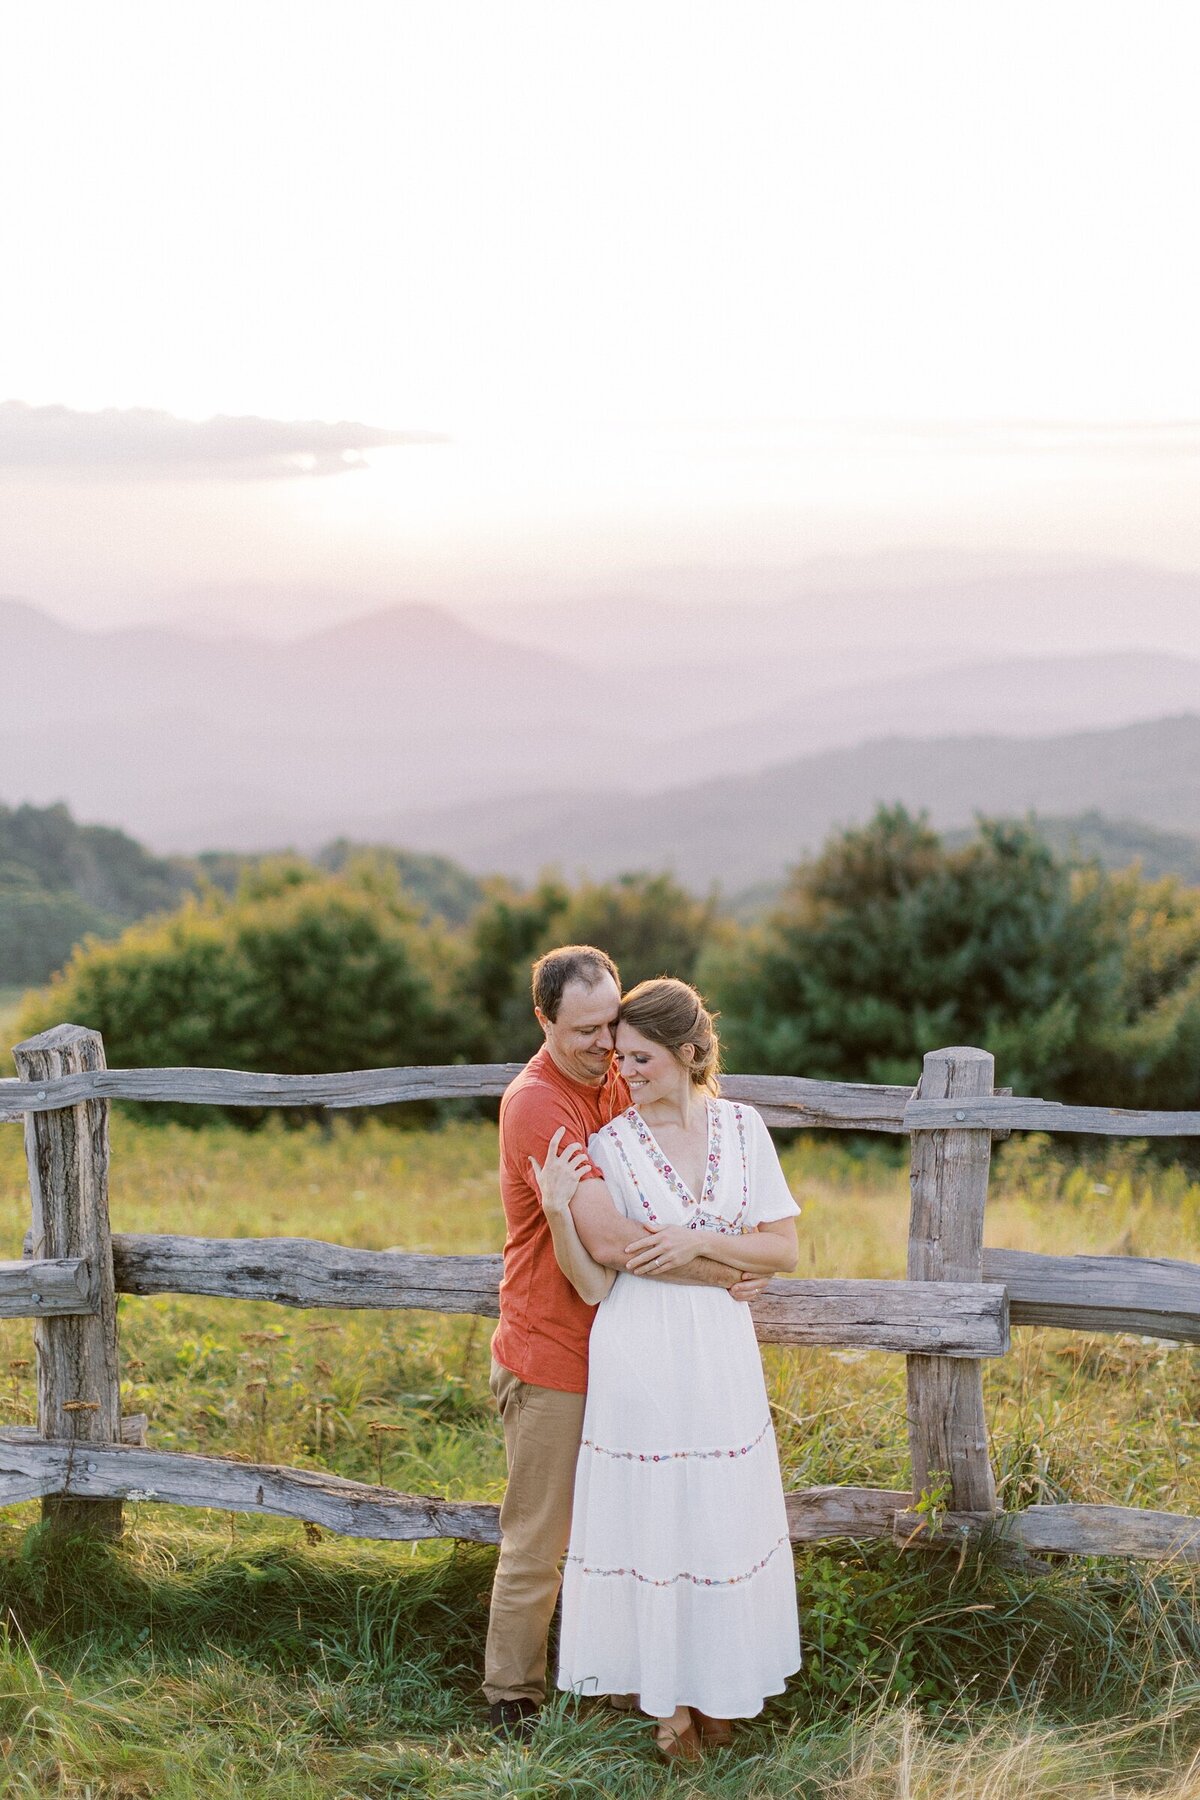 2021 Harrison Family Max Patch North Carolina Photographer Casie Marie Photography-162